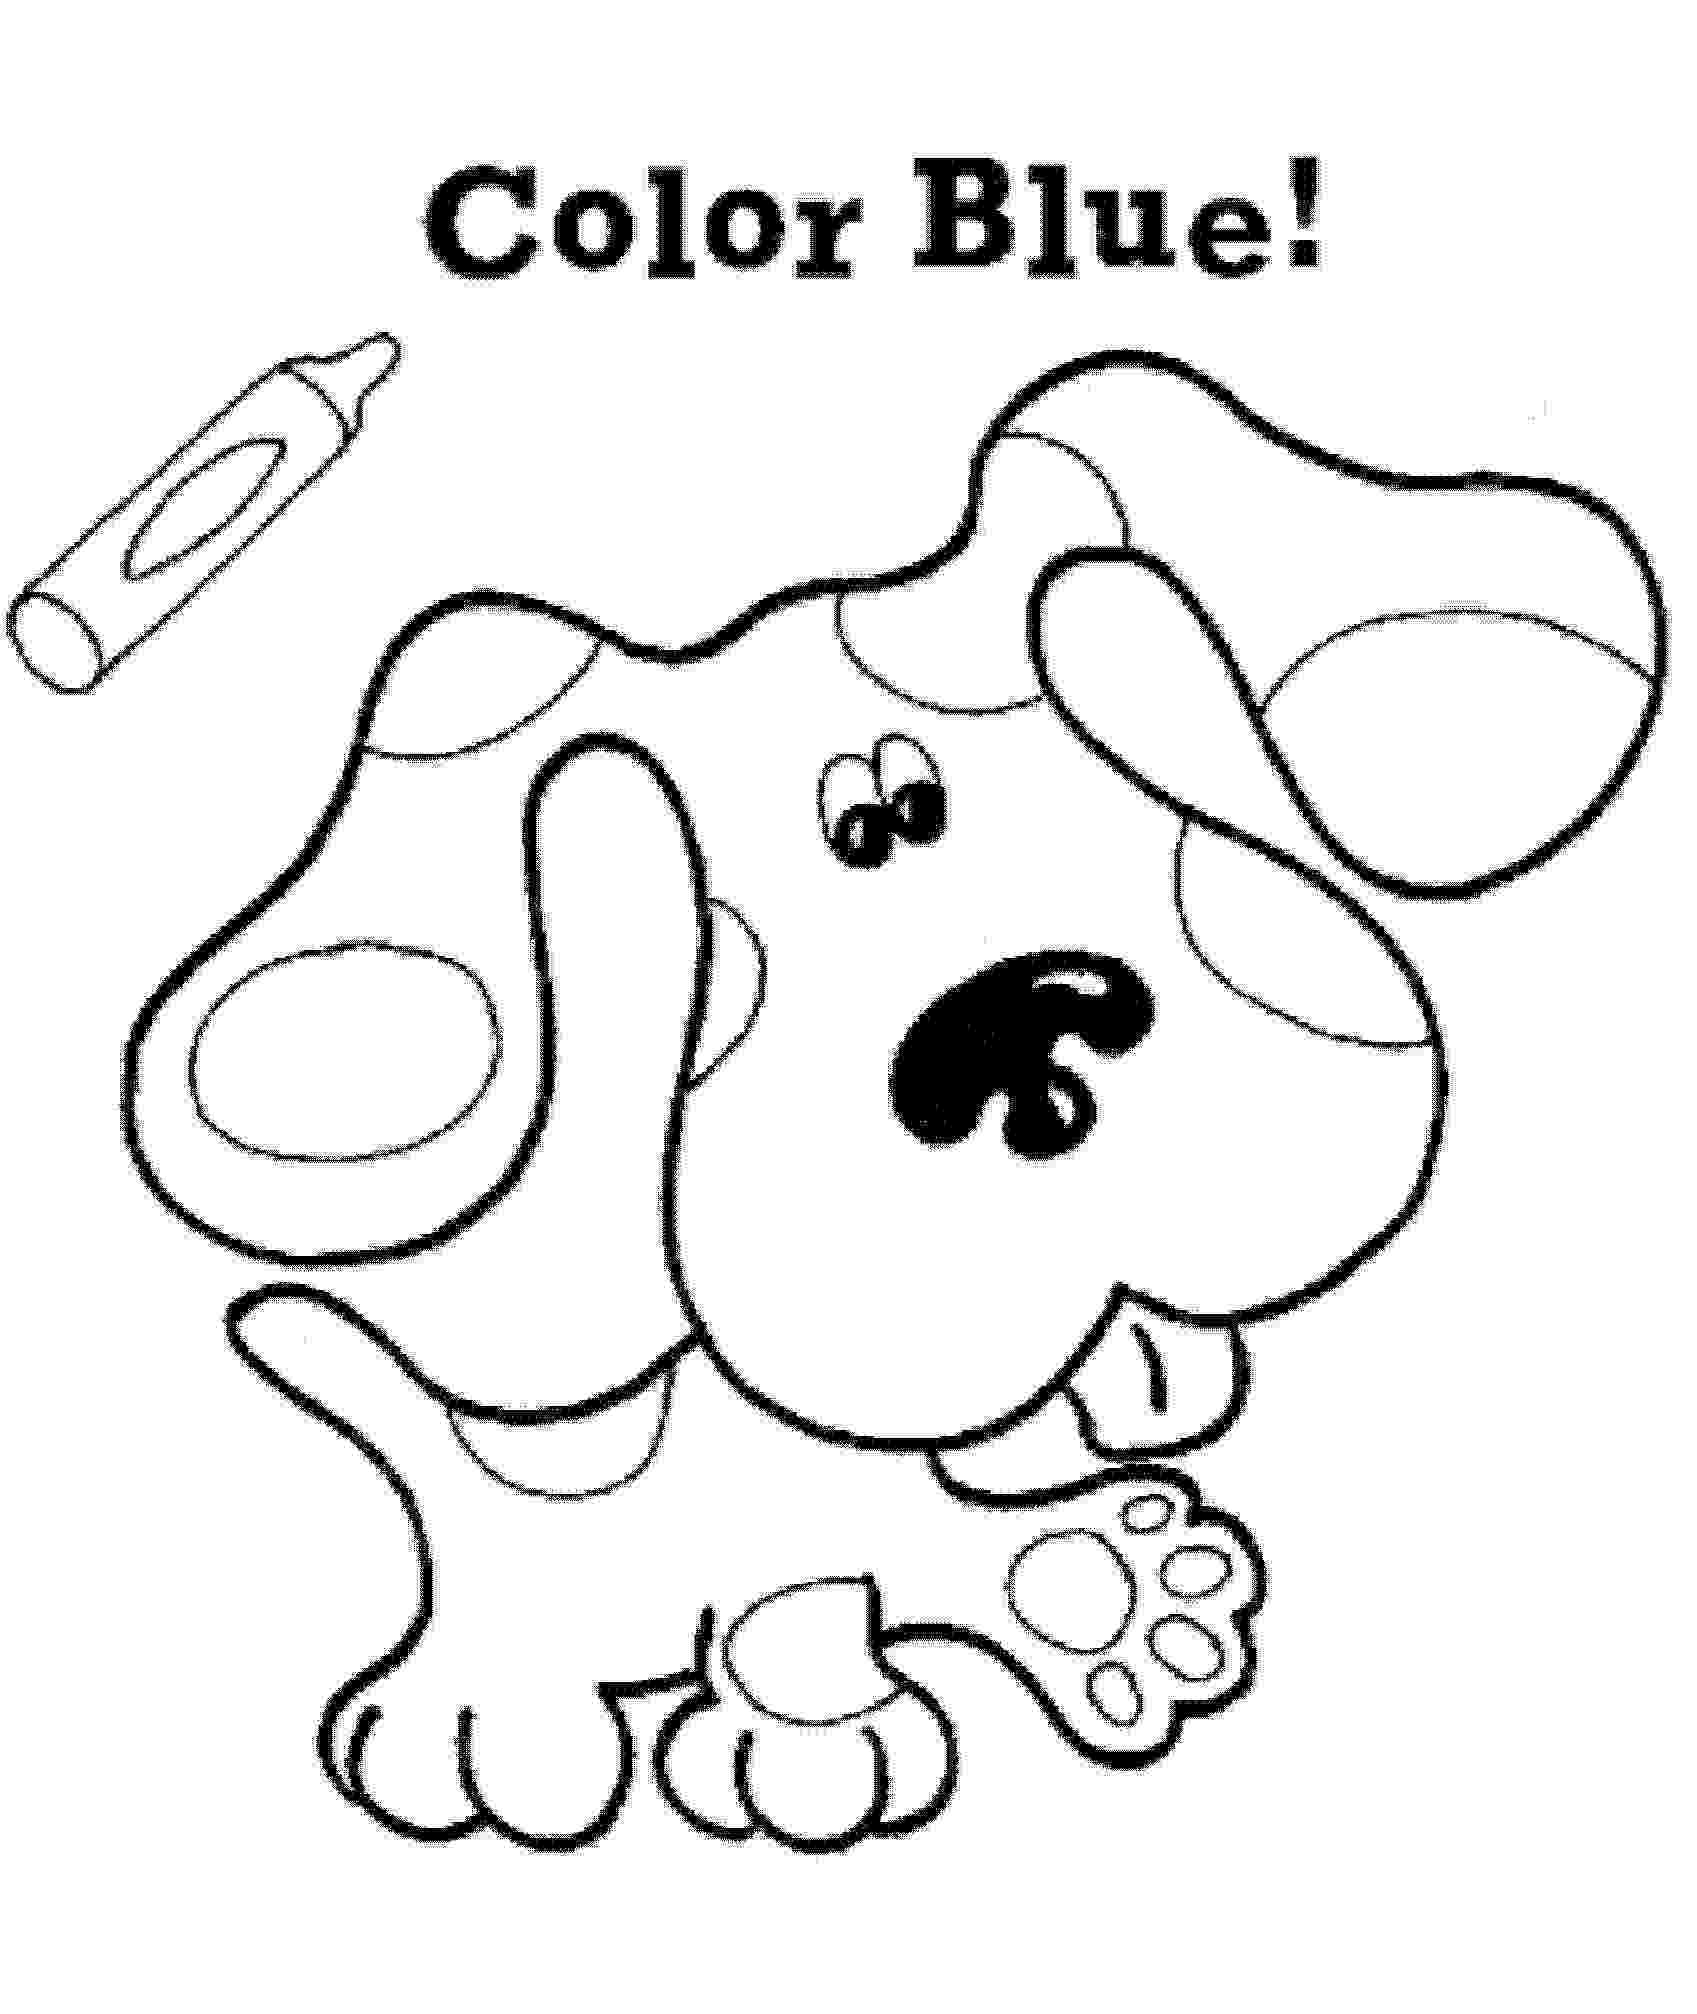 blues clues coloring pages pin by em walker on blues clues party wonder pets clues blues pages coloring 